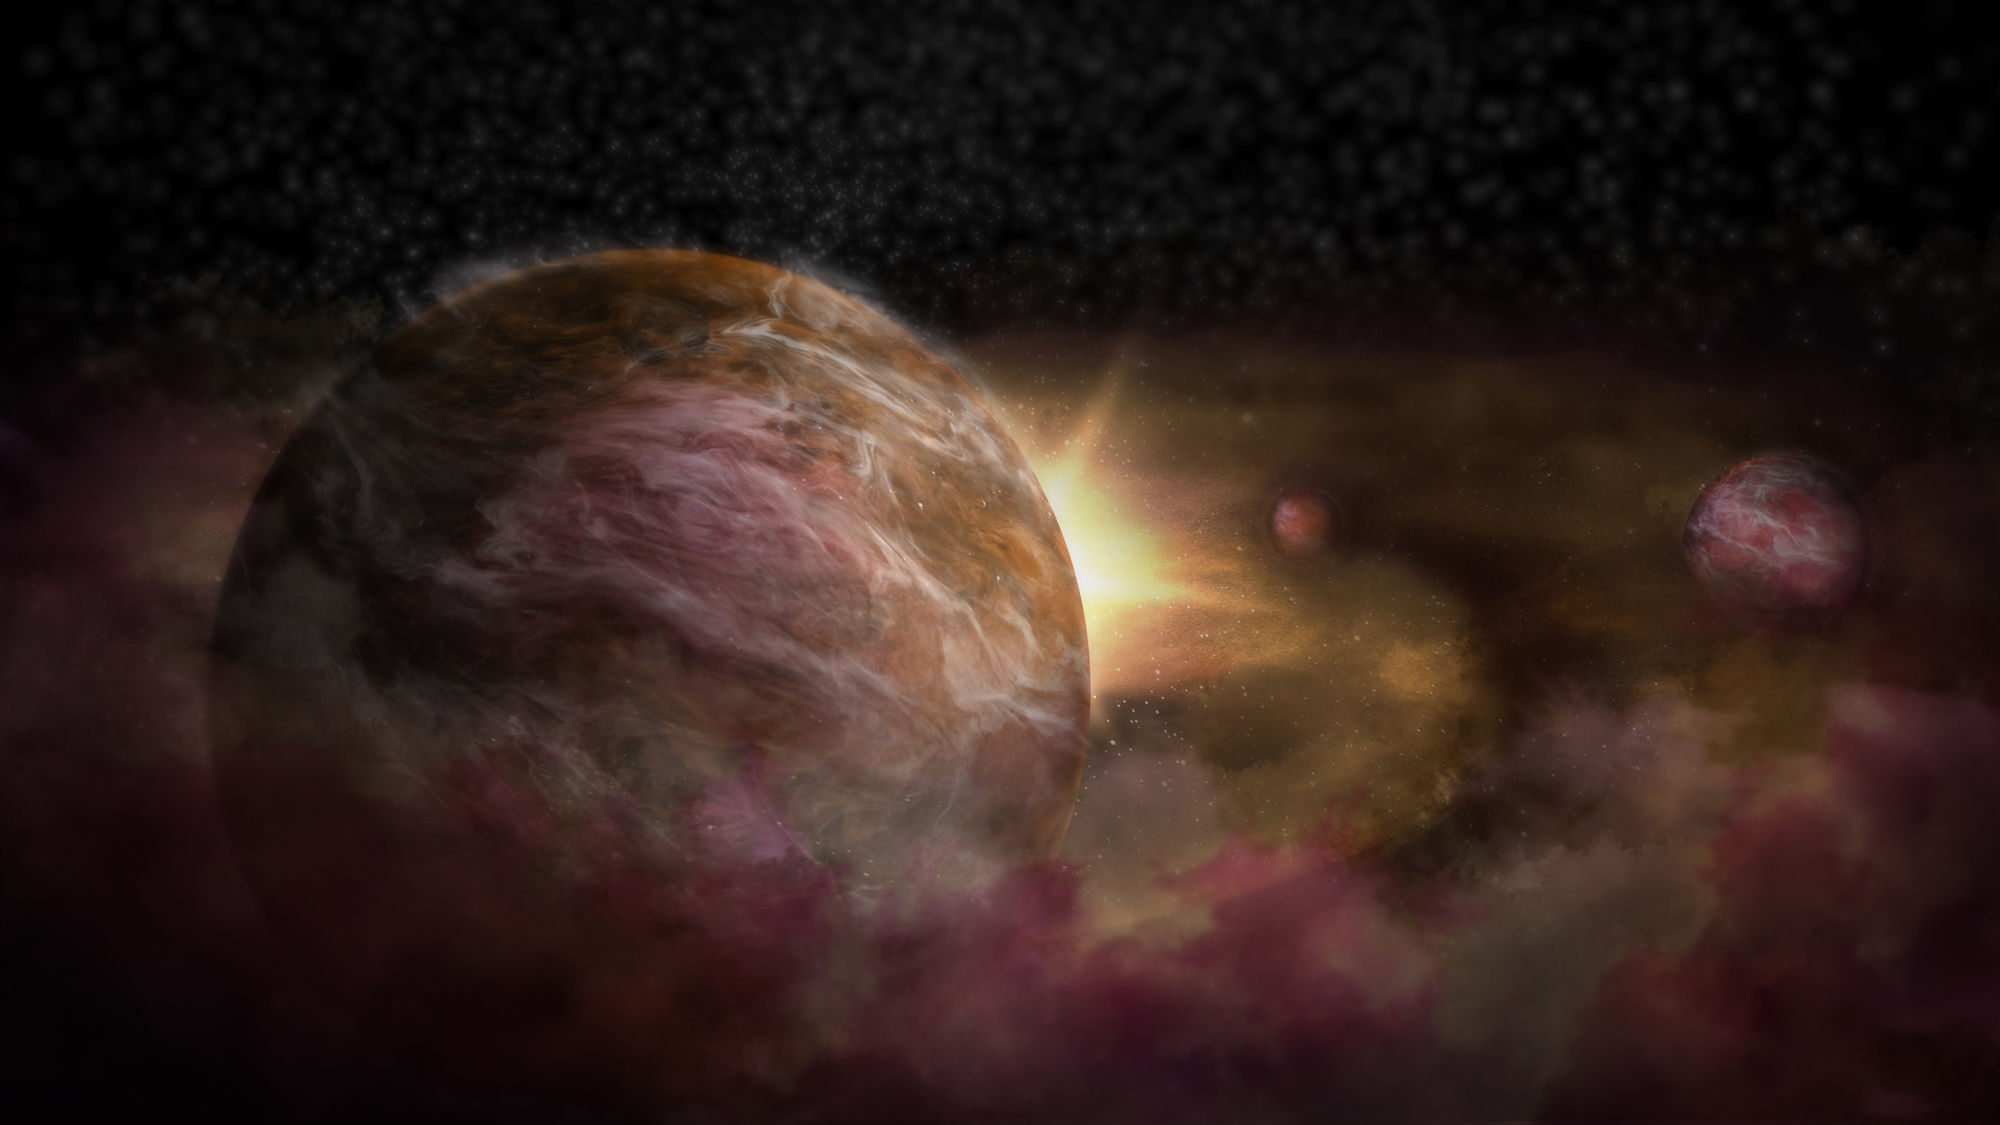 Artist concept of three still-forming planets orbiting the young star HD 163296.  Credit: NRAO/AUI/NSF; S. Dagnello